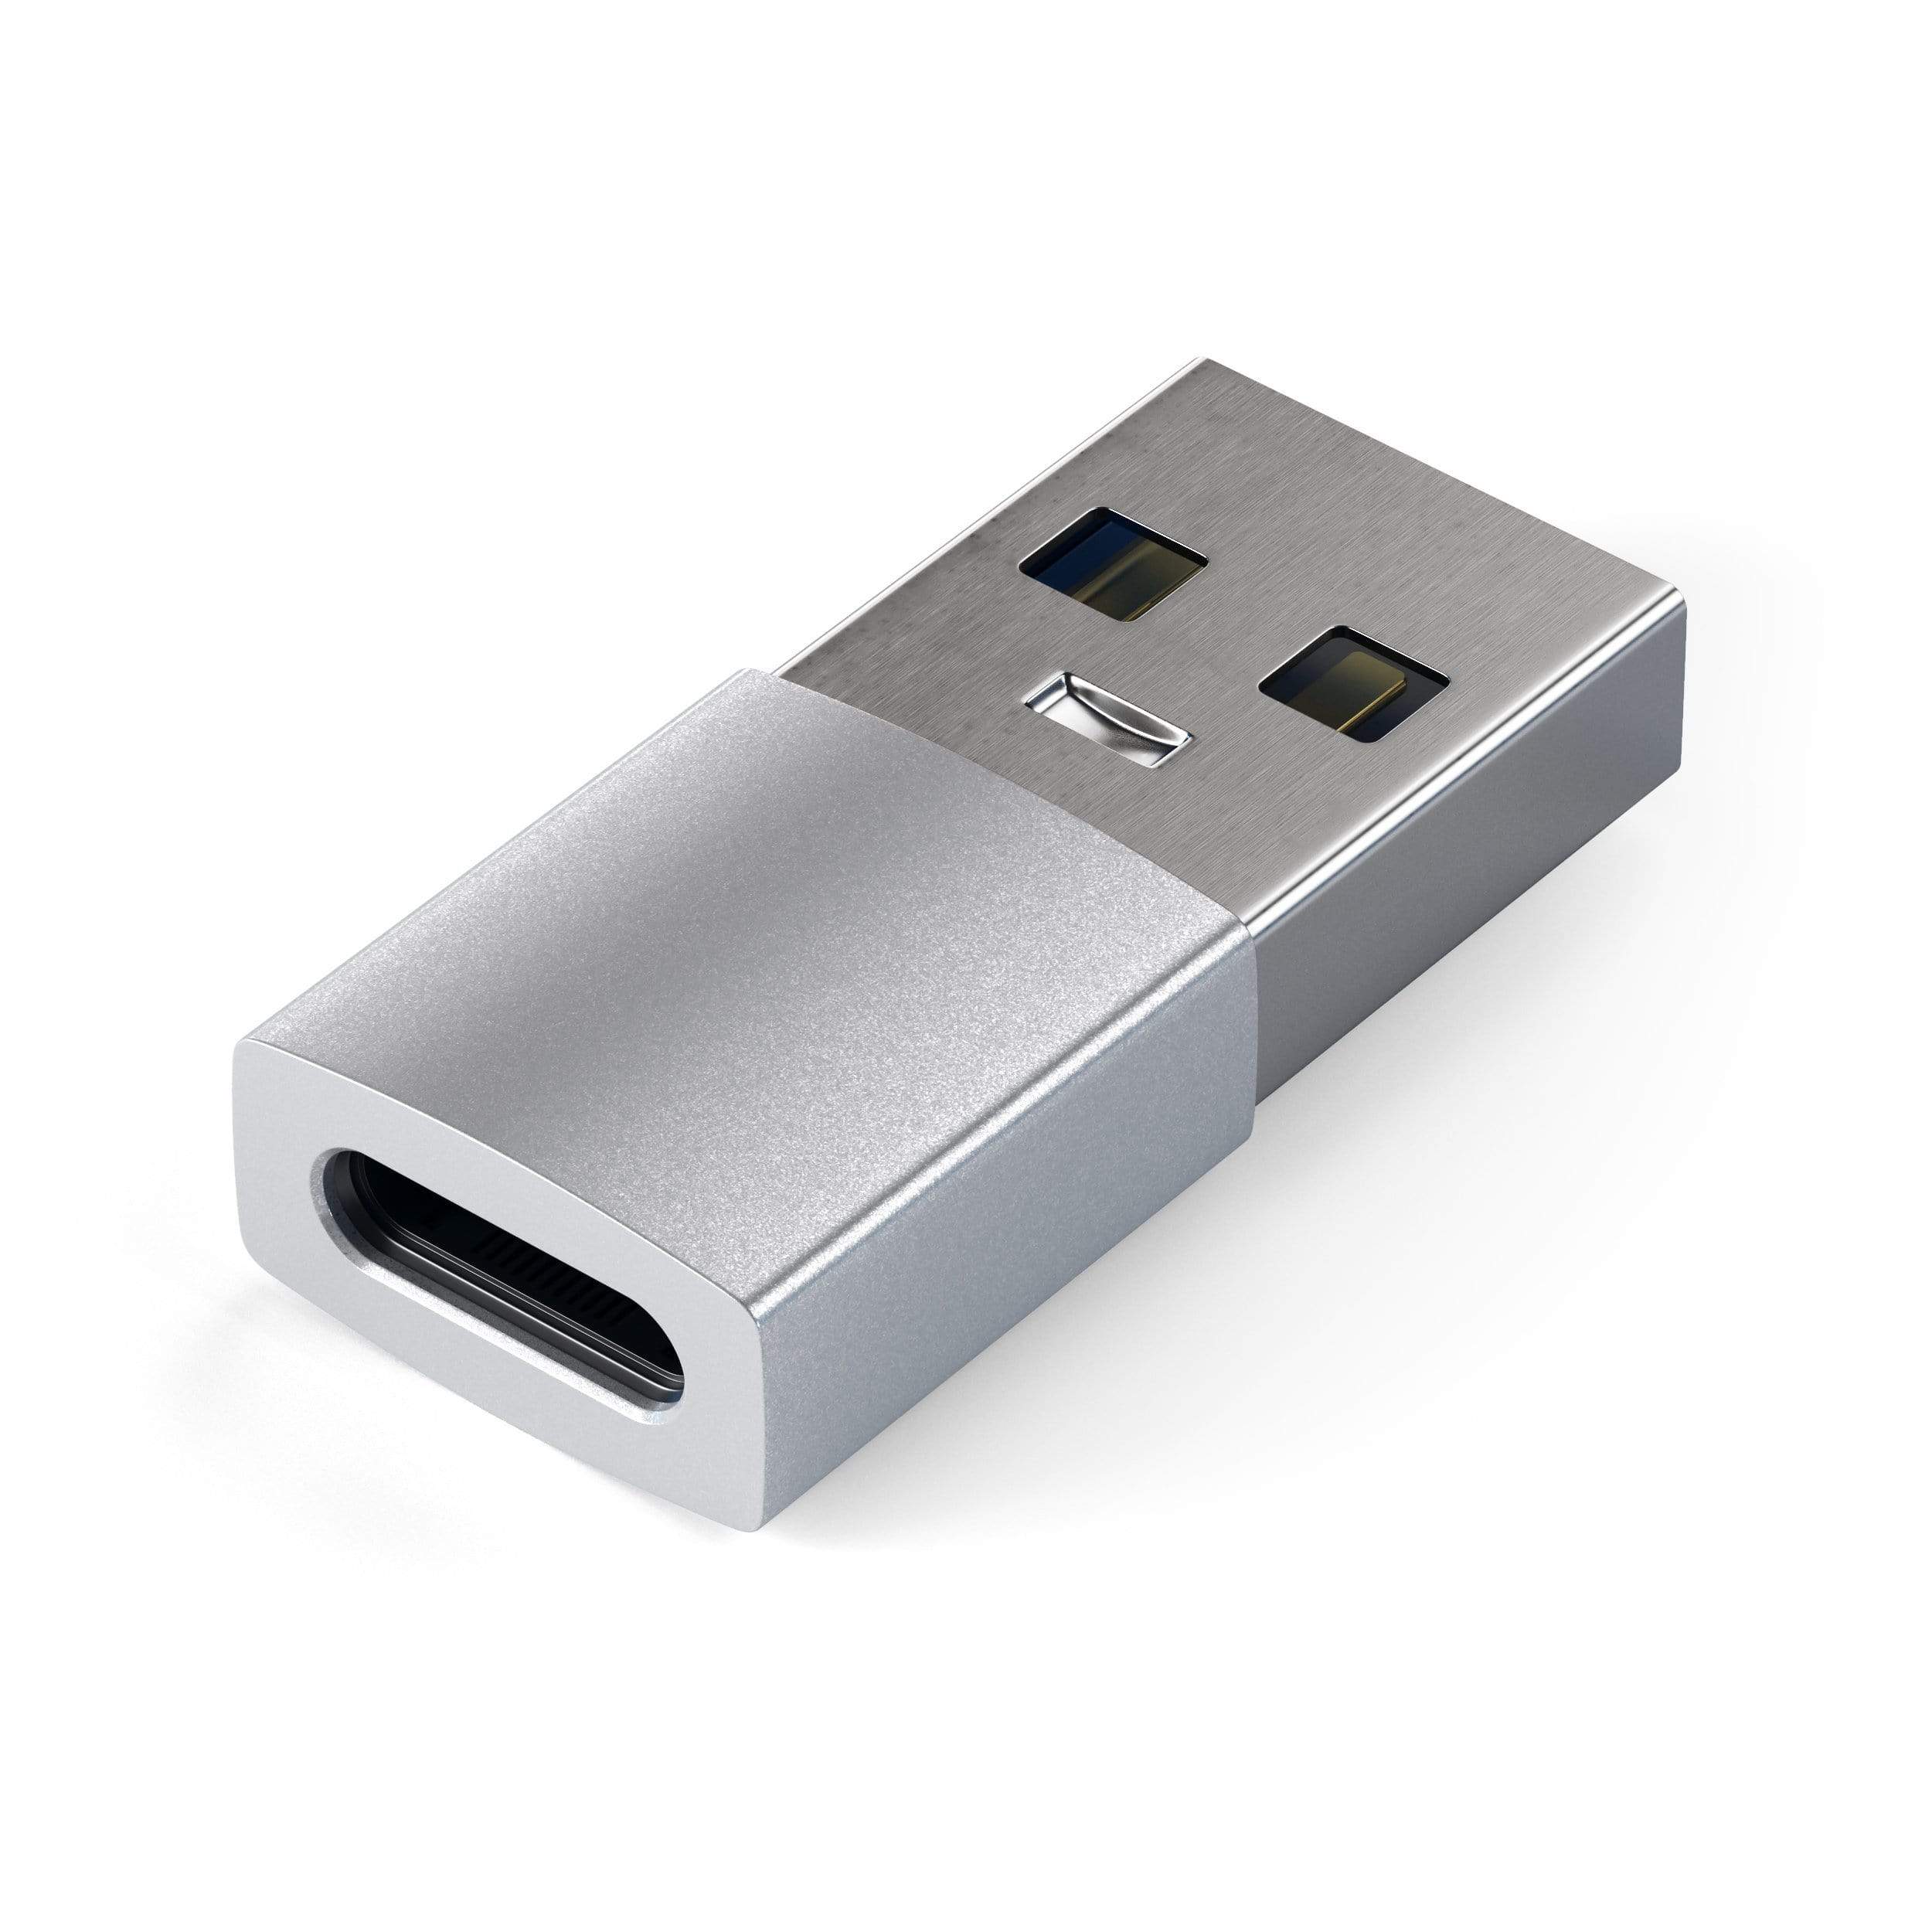 type-a-to-type-c-adapter-usb-c-satechi-silver-894977.jpg